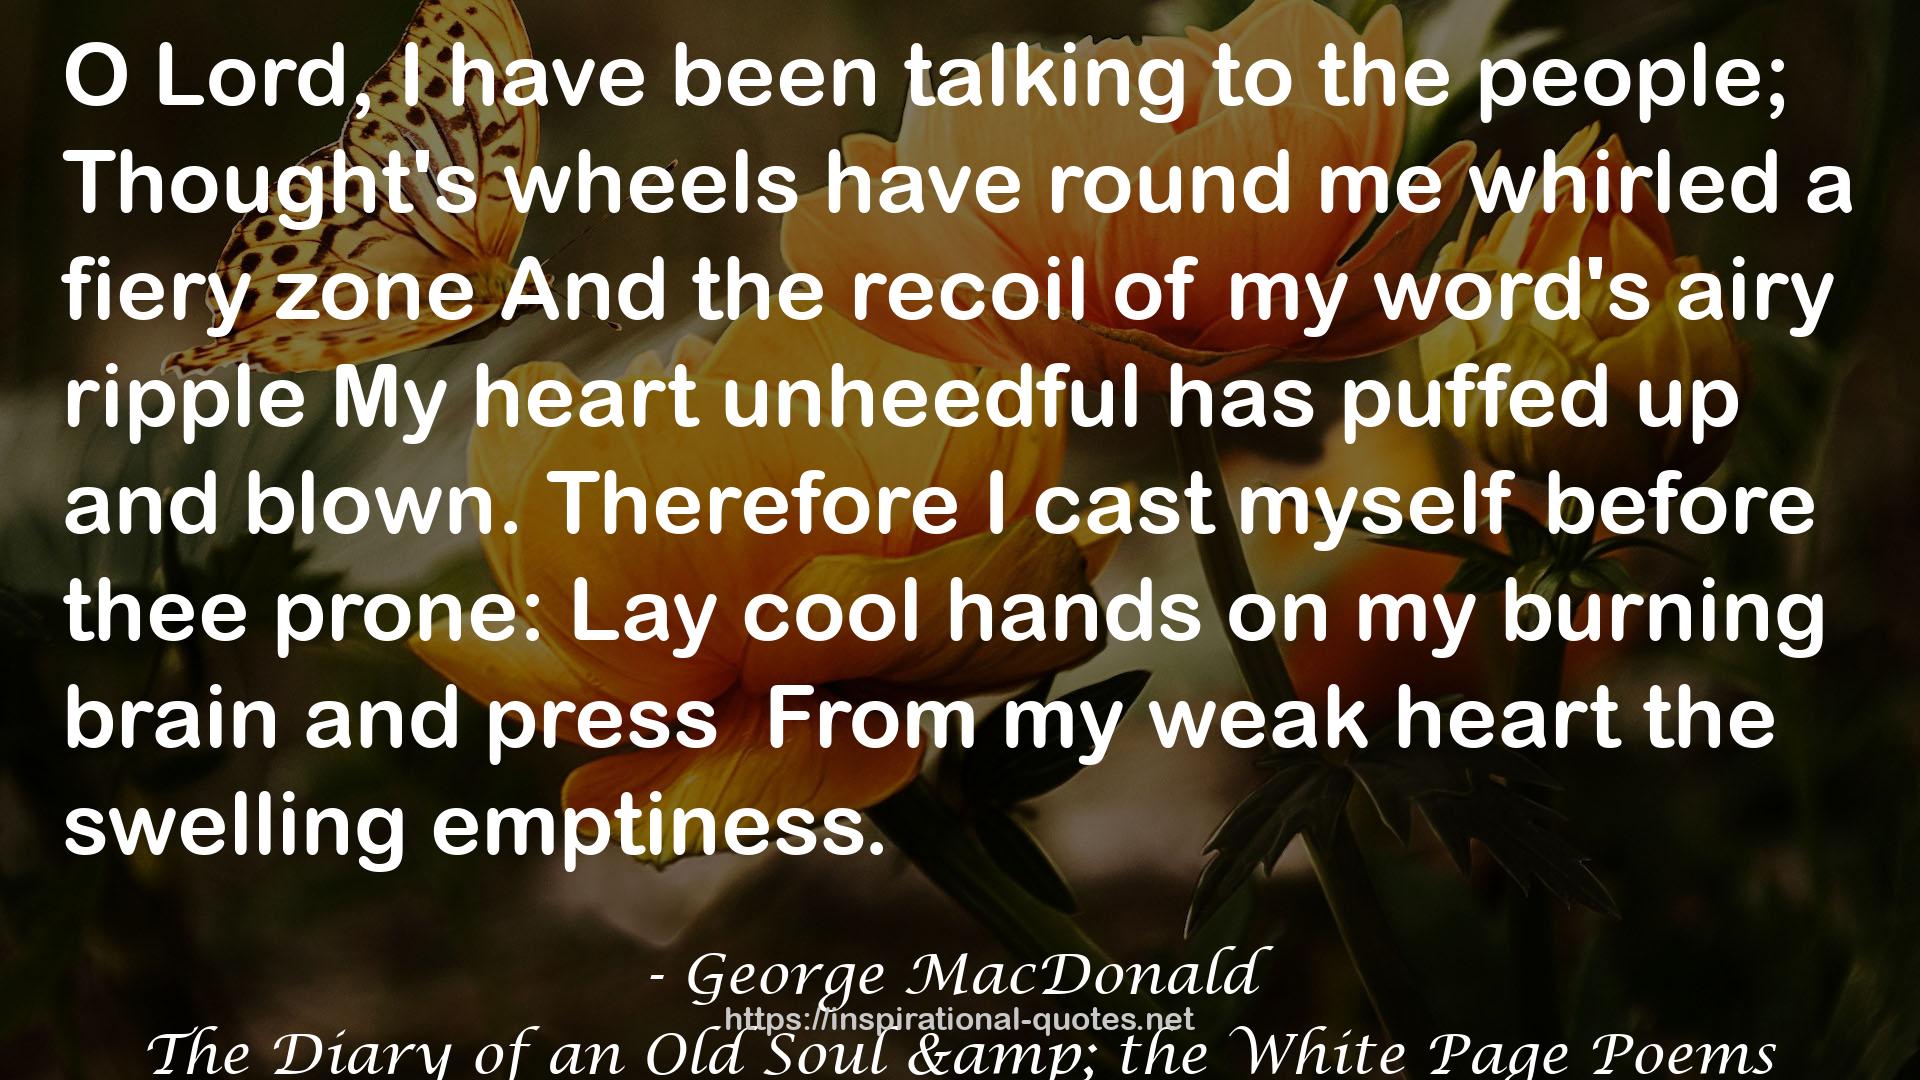 The Diary of an Old Soul & the White Page Poems QUOTES